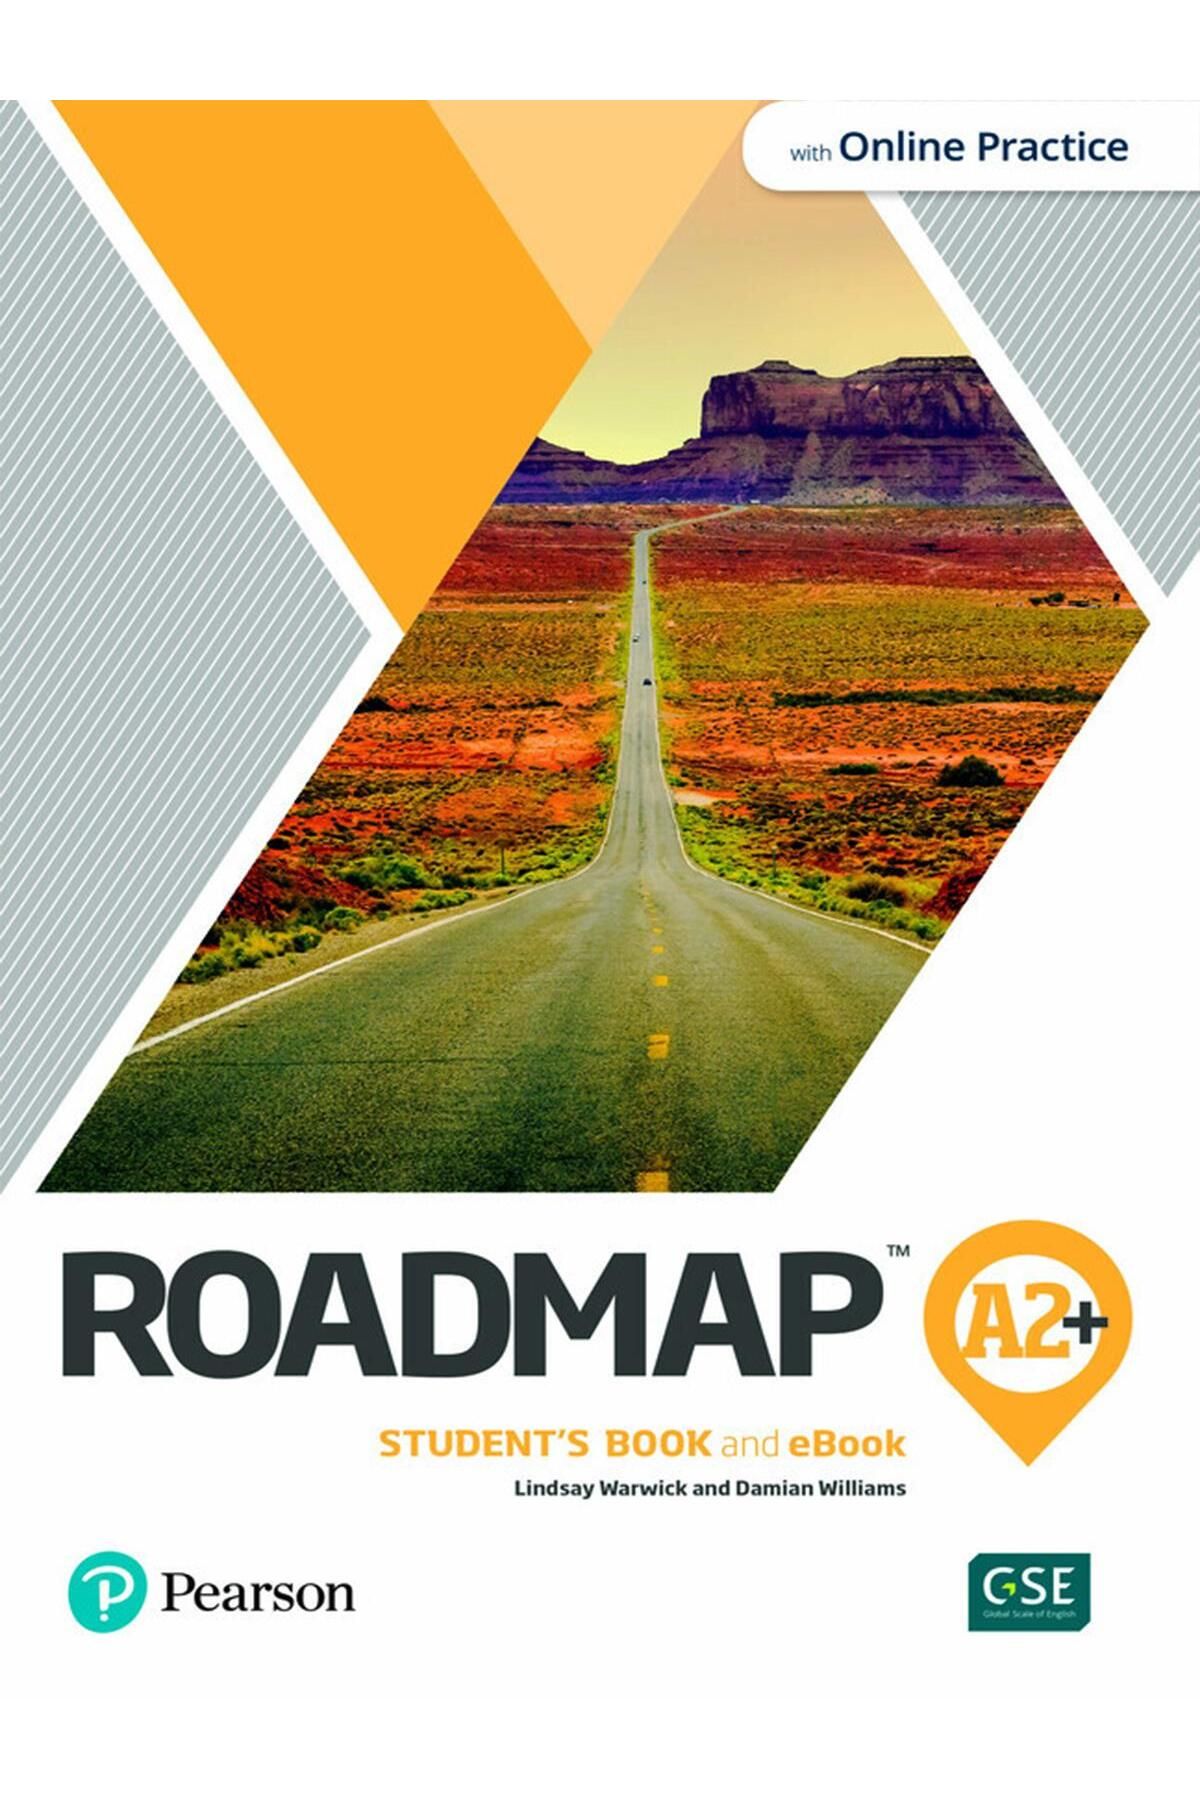 Pearson Roadmap A2+ Student's Book & eBook with Online Practice